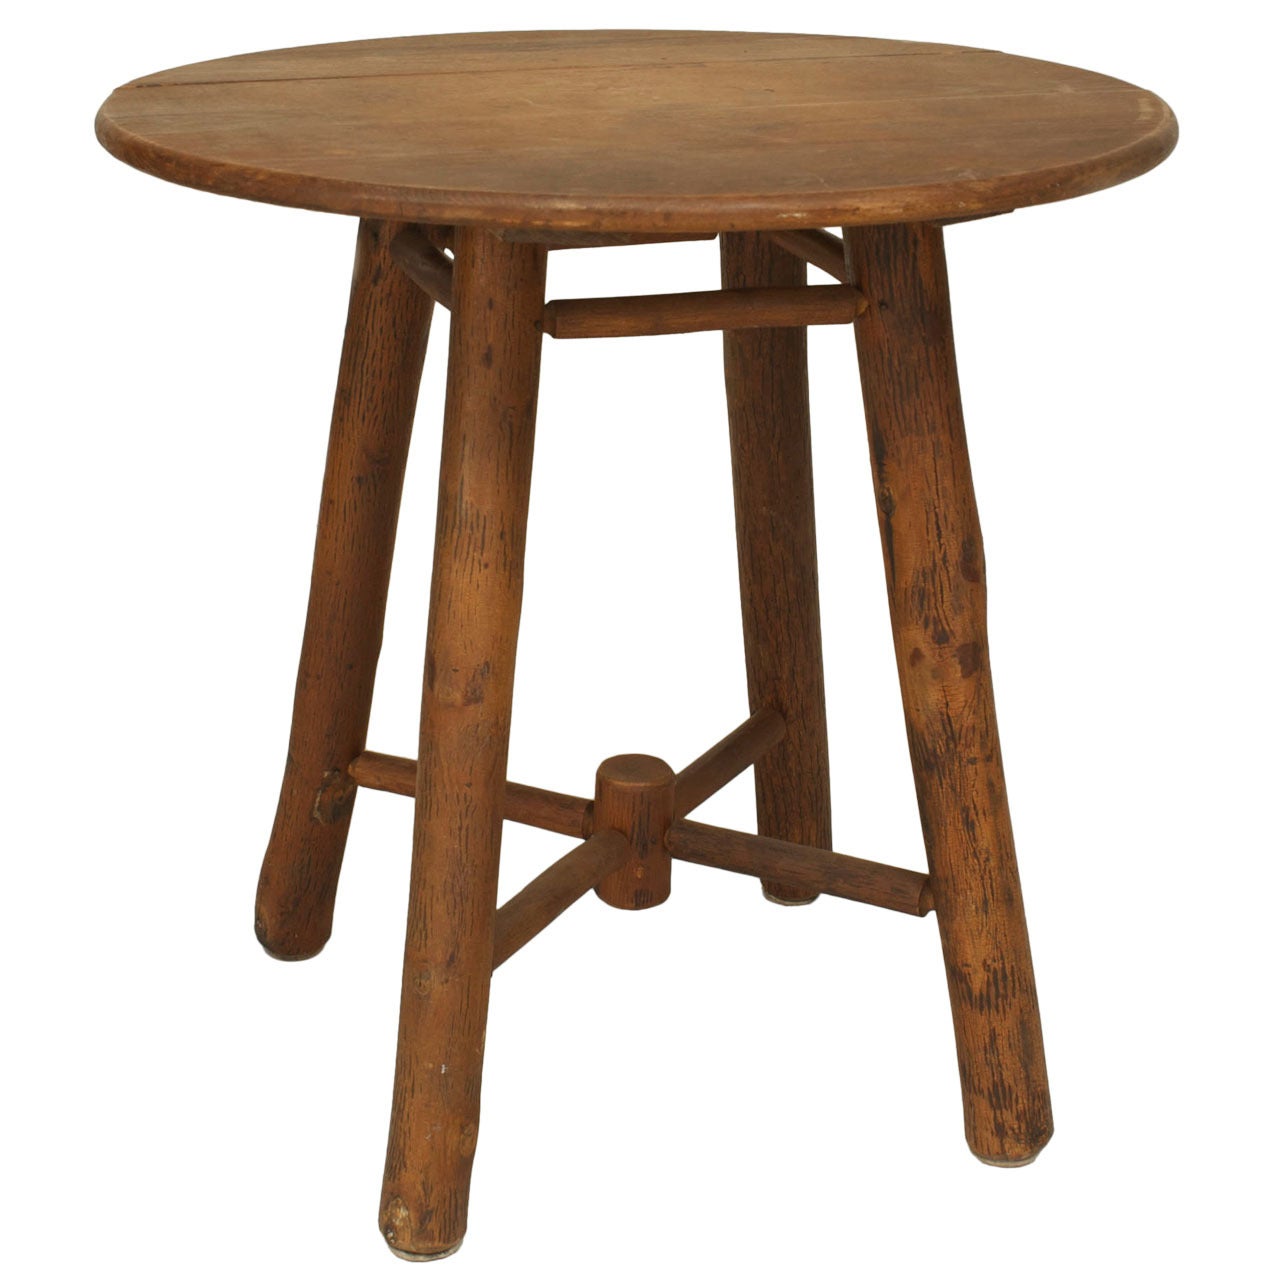 20th c. American Rustic Old Hickory End Table